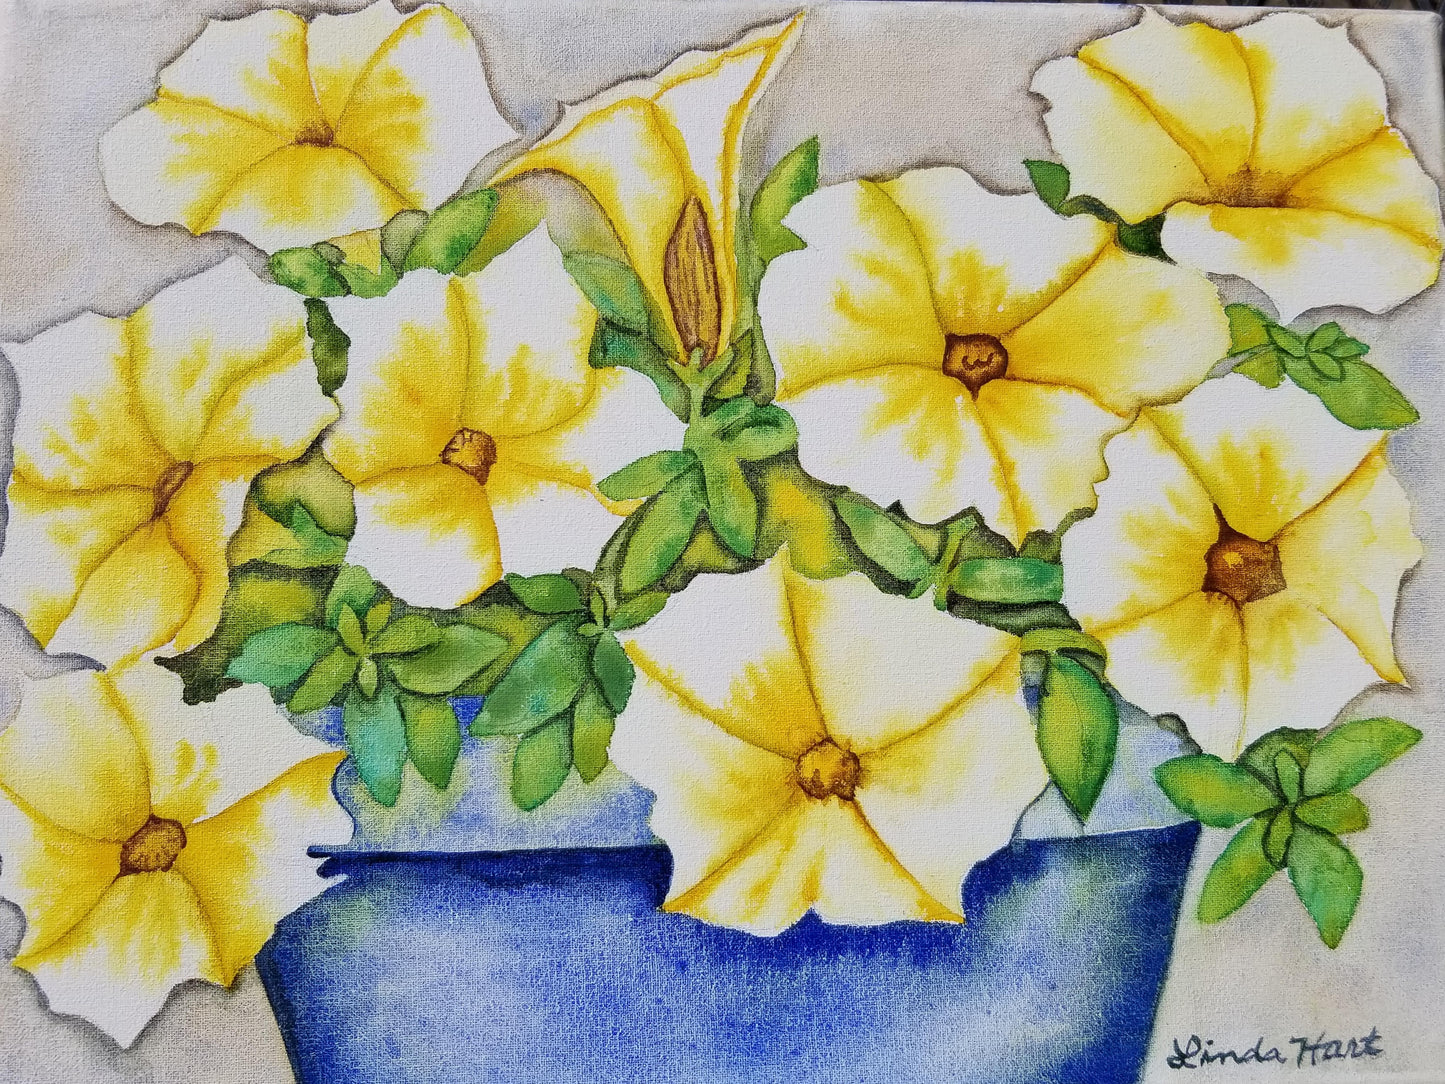 Petunias in Blue Pottery - (" X 12" x 7/8" - Original Watercolor Painting on Canvas